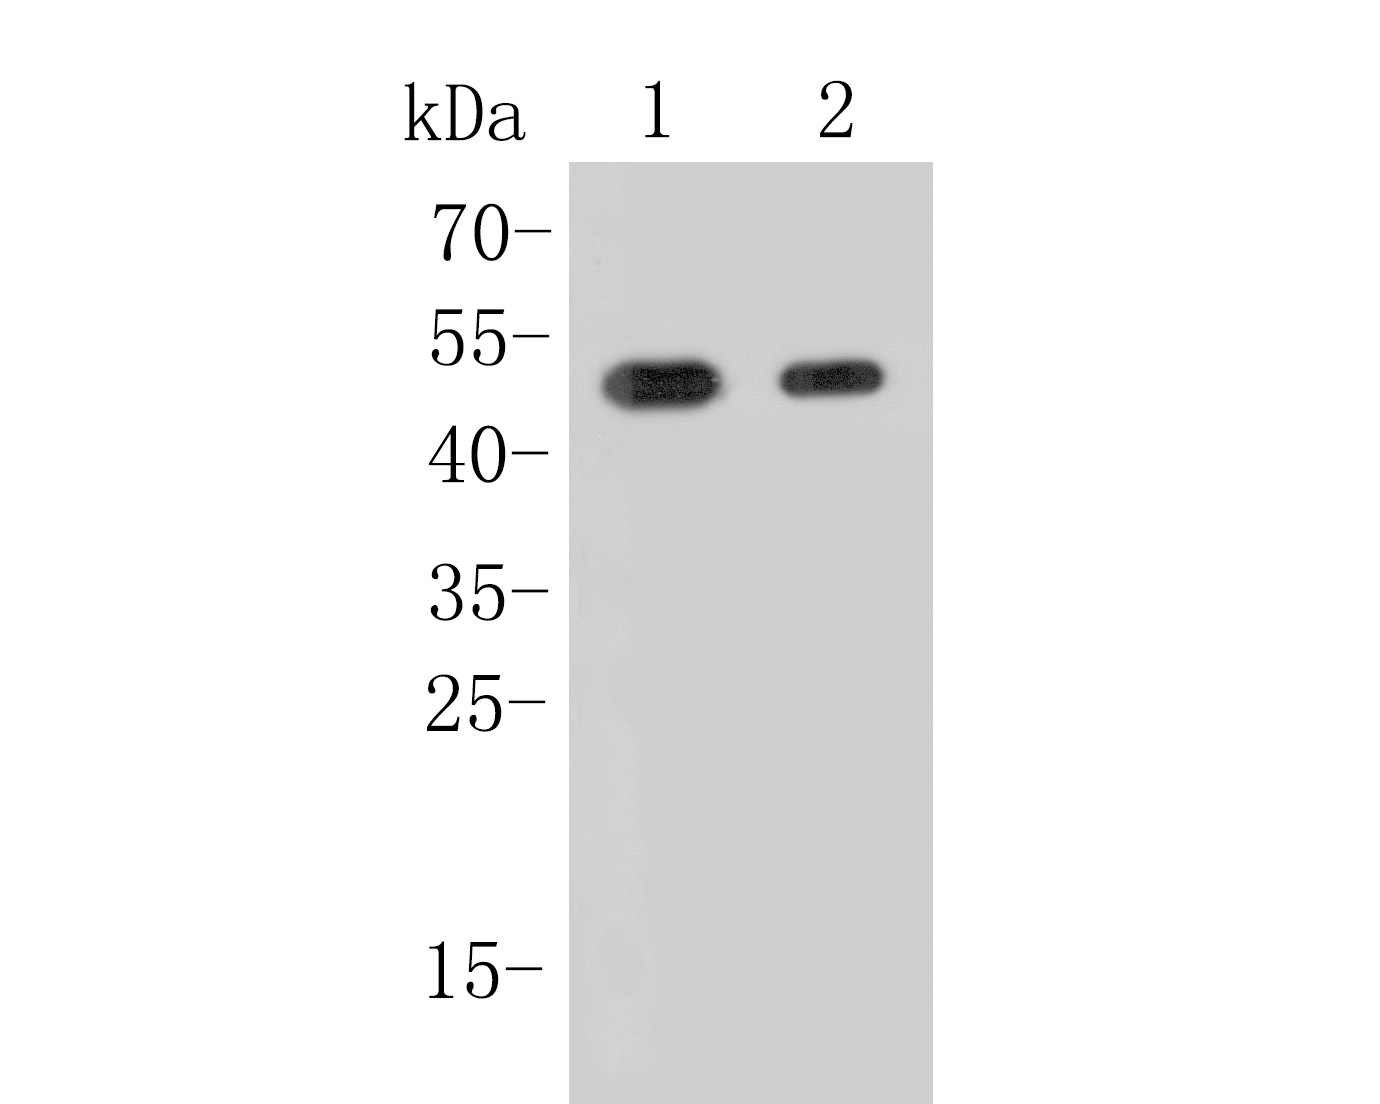 Western blot analysis of c-Fos on different lysates. Proteins were transferred to a PVDF membrane and blocked with 5% BSA in PBS for 1 hour at room temperature. The primary antibody (ET1701-95, 1/500) was used in 5% BSA at room temperature for 2 hours. Goat Anti-Rabbit IgG - HRP Secondary Antibody (HA1001) at 1:200,000 dilution was used for 1 hour at room temperature.<br />
Positive control: <br />
Lane 1: NIH/3T3 cell lysate<br />
Lane 2: MCF-7 cell lysate